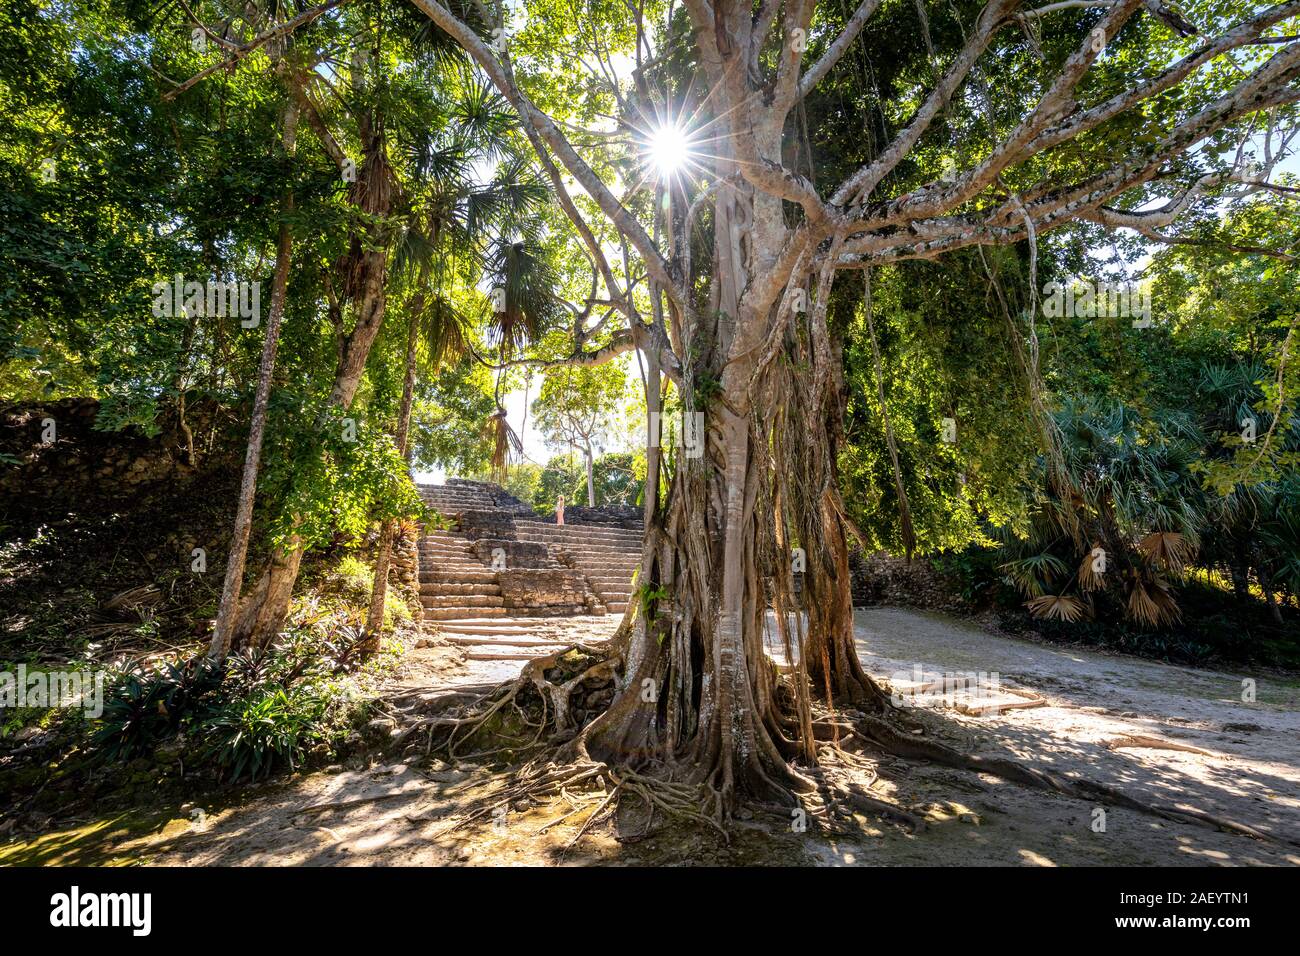 The Mayan ruins of Chaacchoben in Quintana Roo, Mexico. Stock Photo